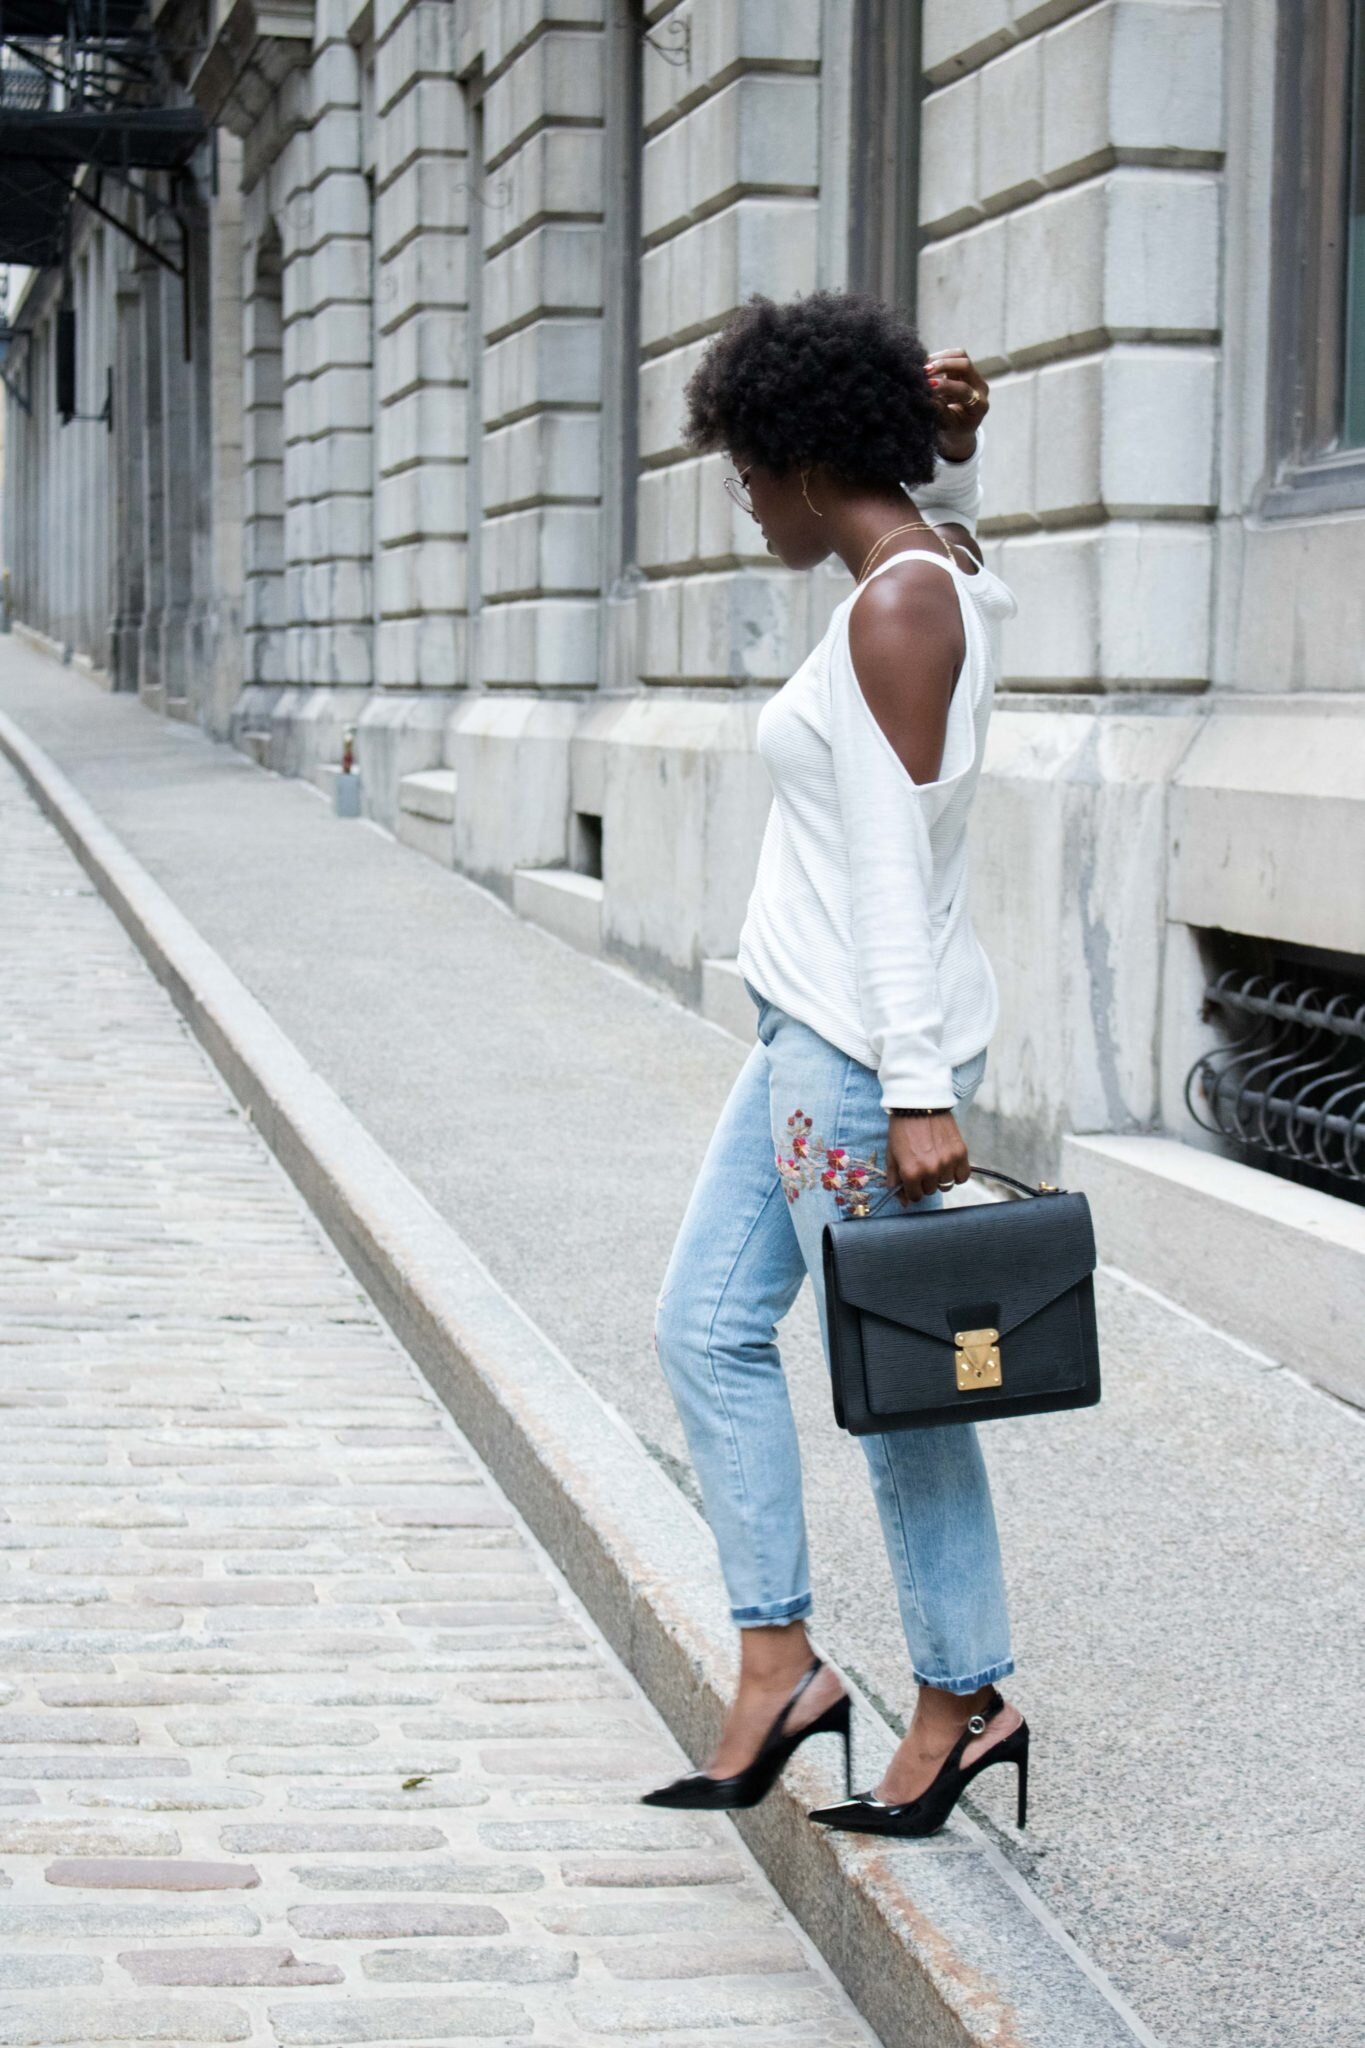 HOW TO AFFORD LUXURY BAGS — Petite and Bold